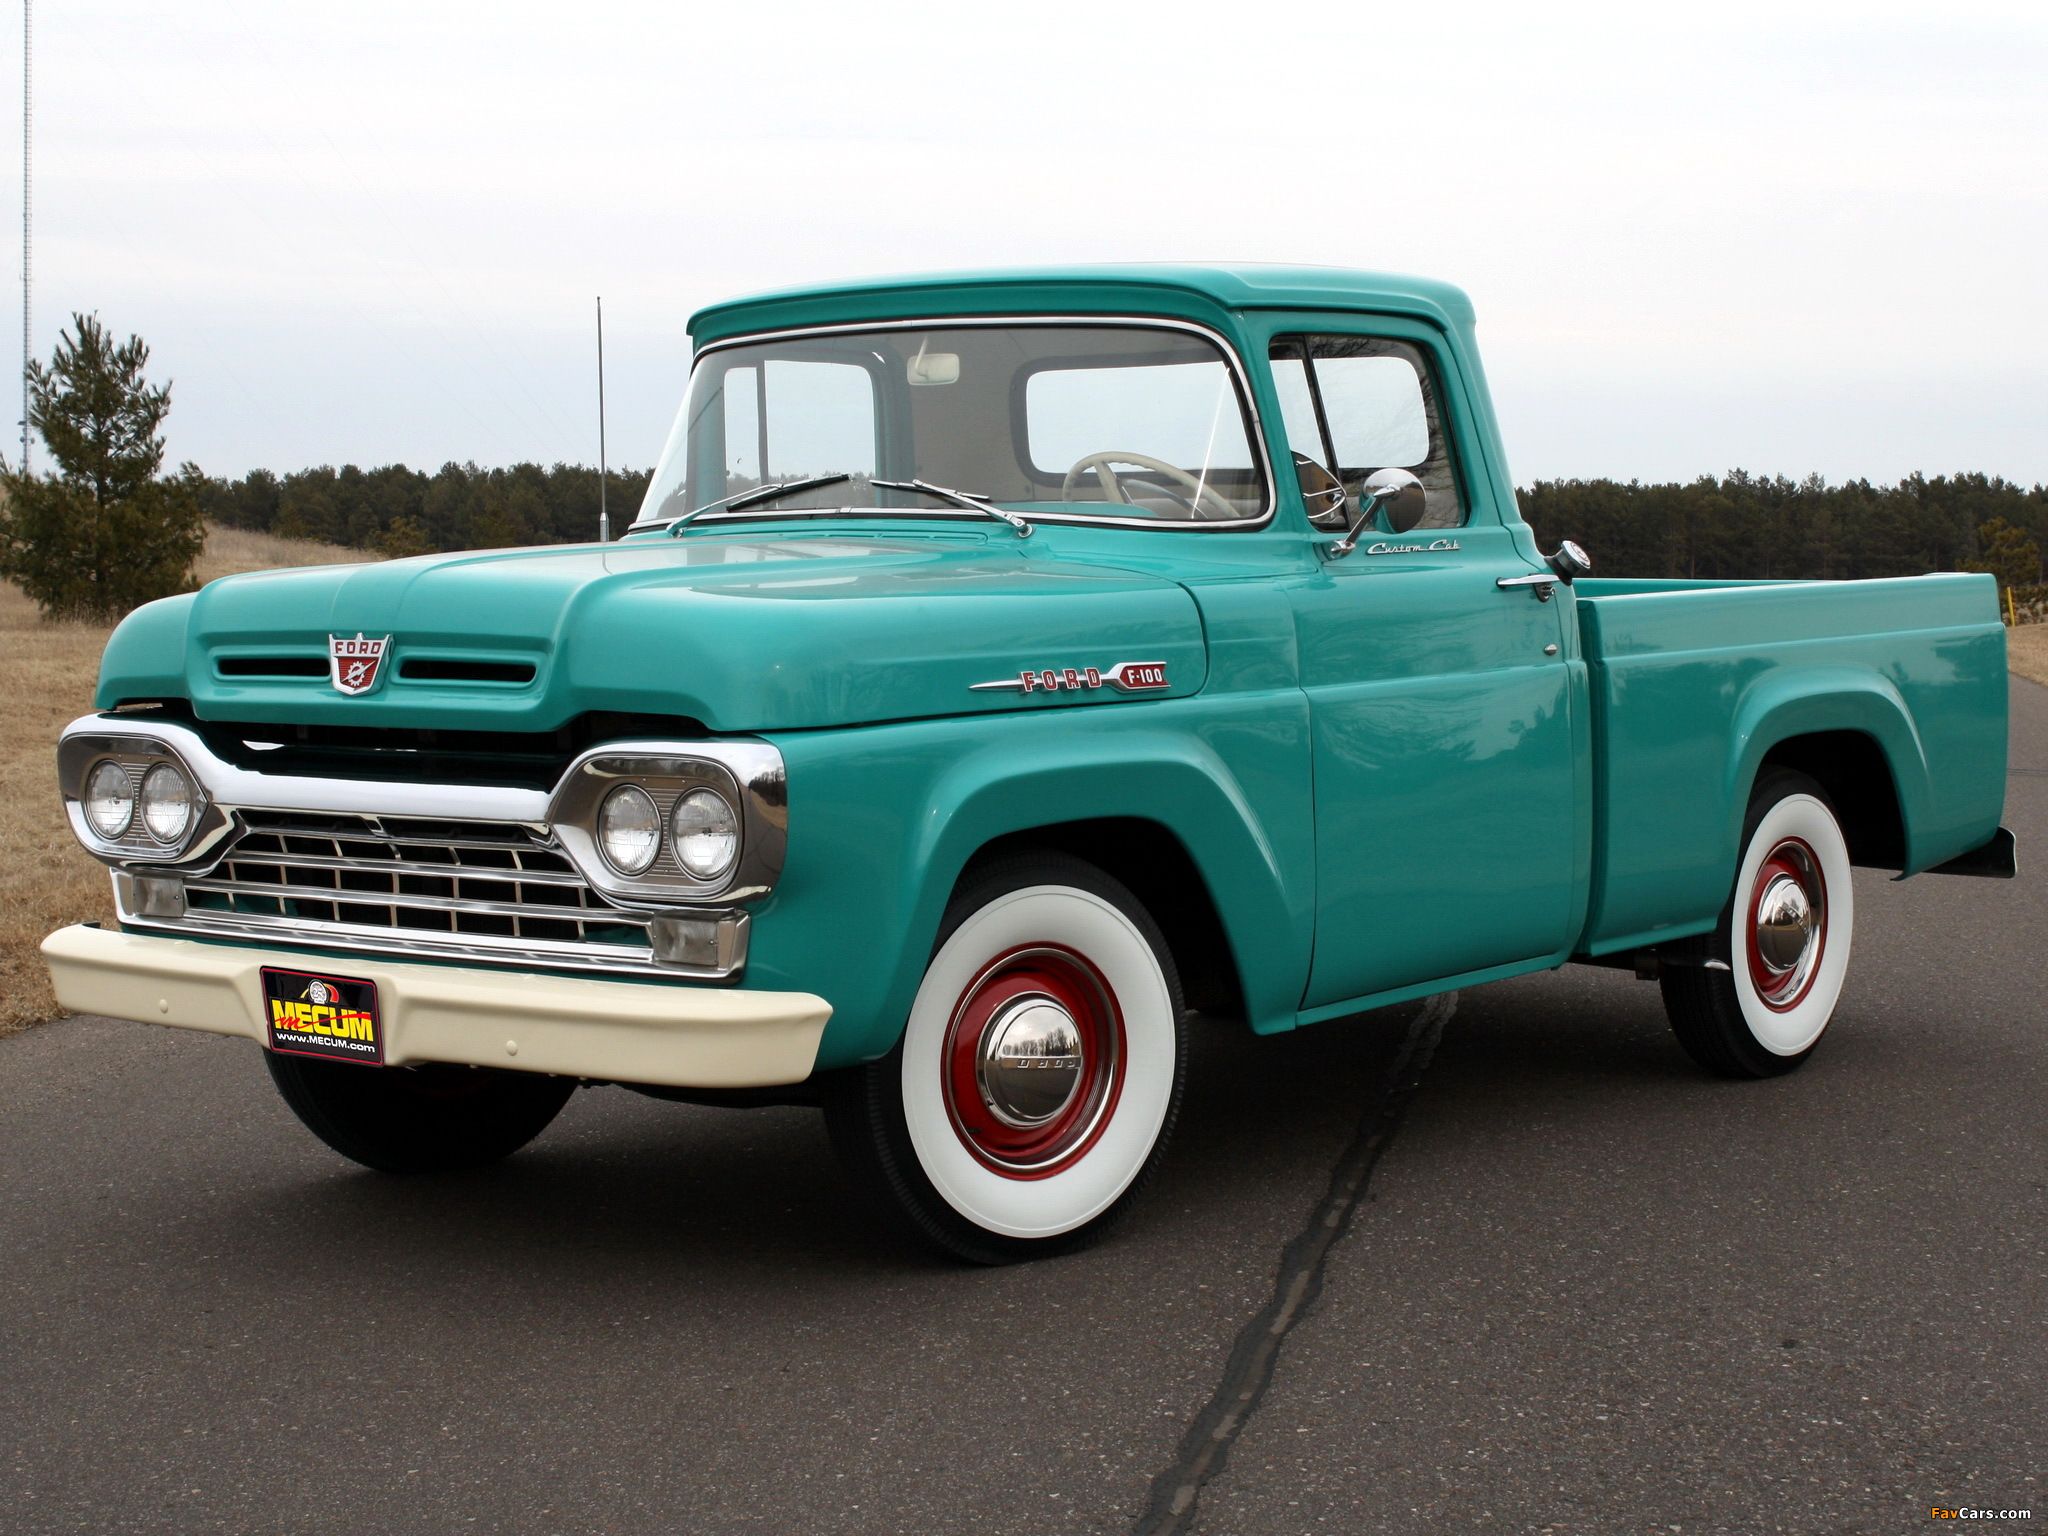 Green Ford F-100 custom cab pick up truck front view